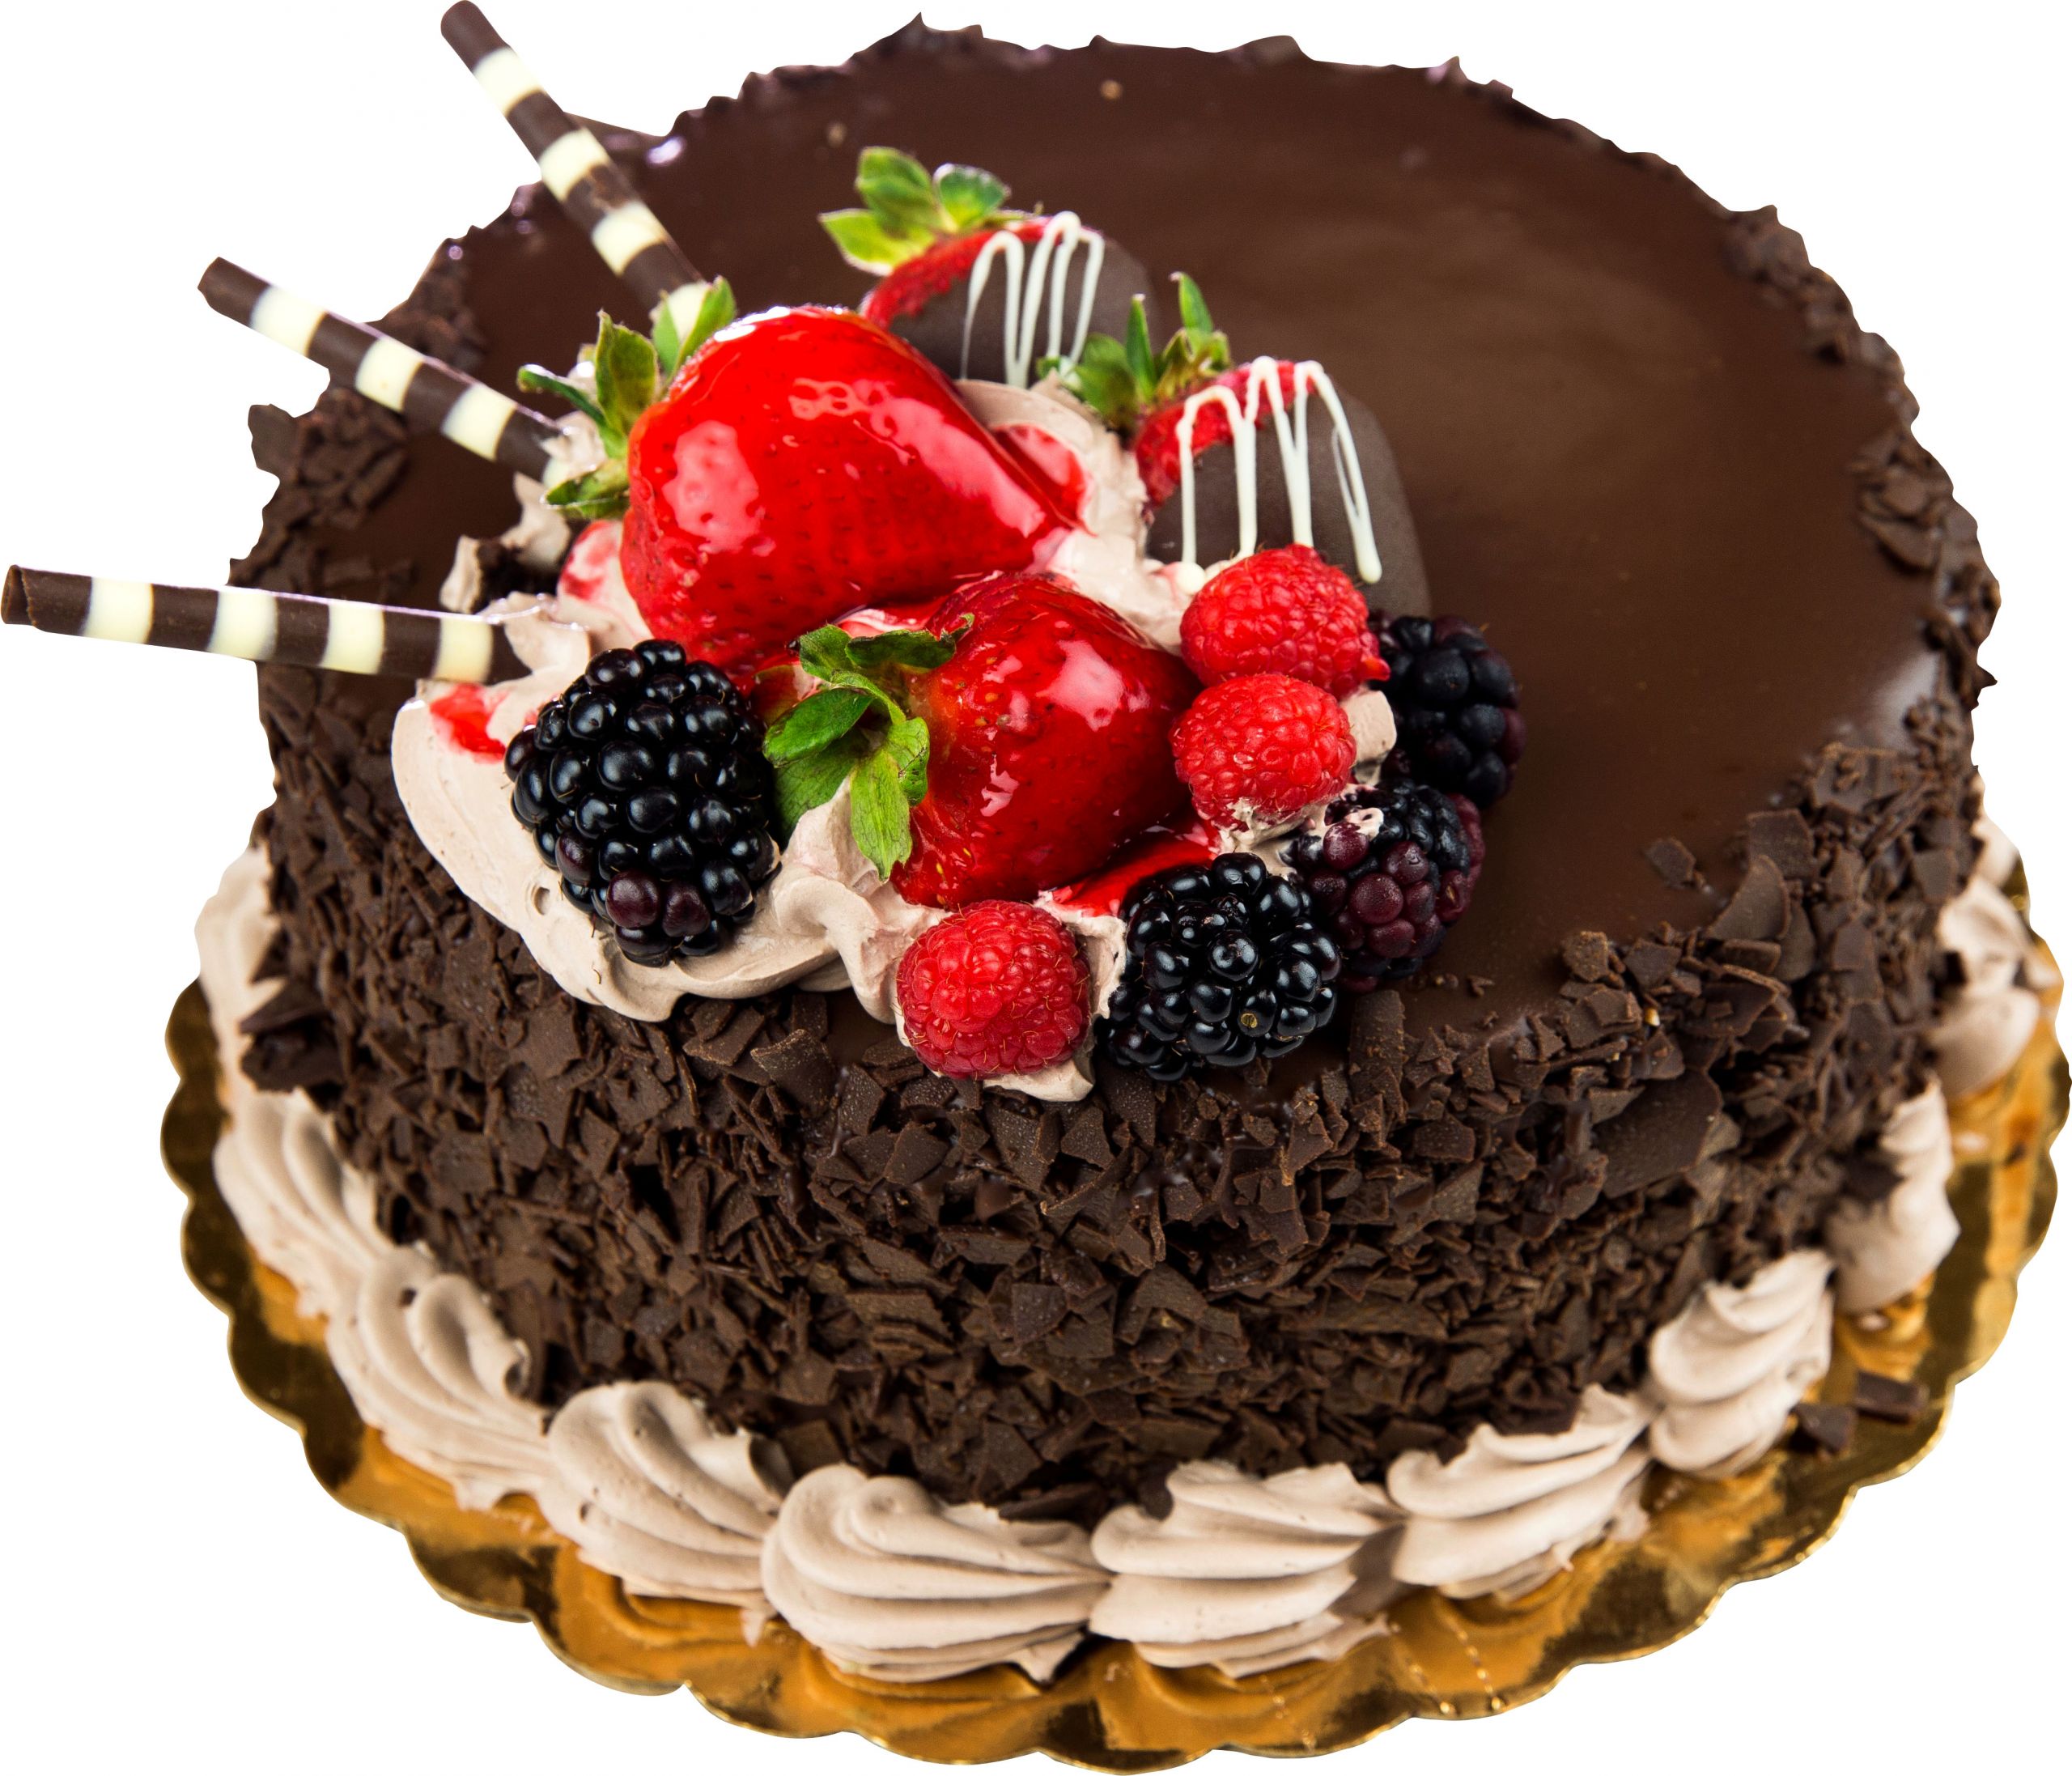 The Best Gourmet Desserts Online - Best Recipes Ideas and Collections